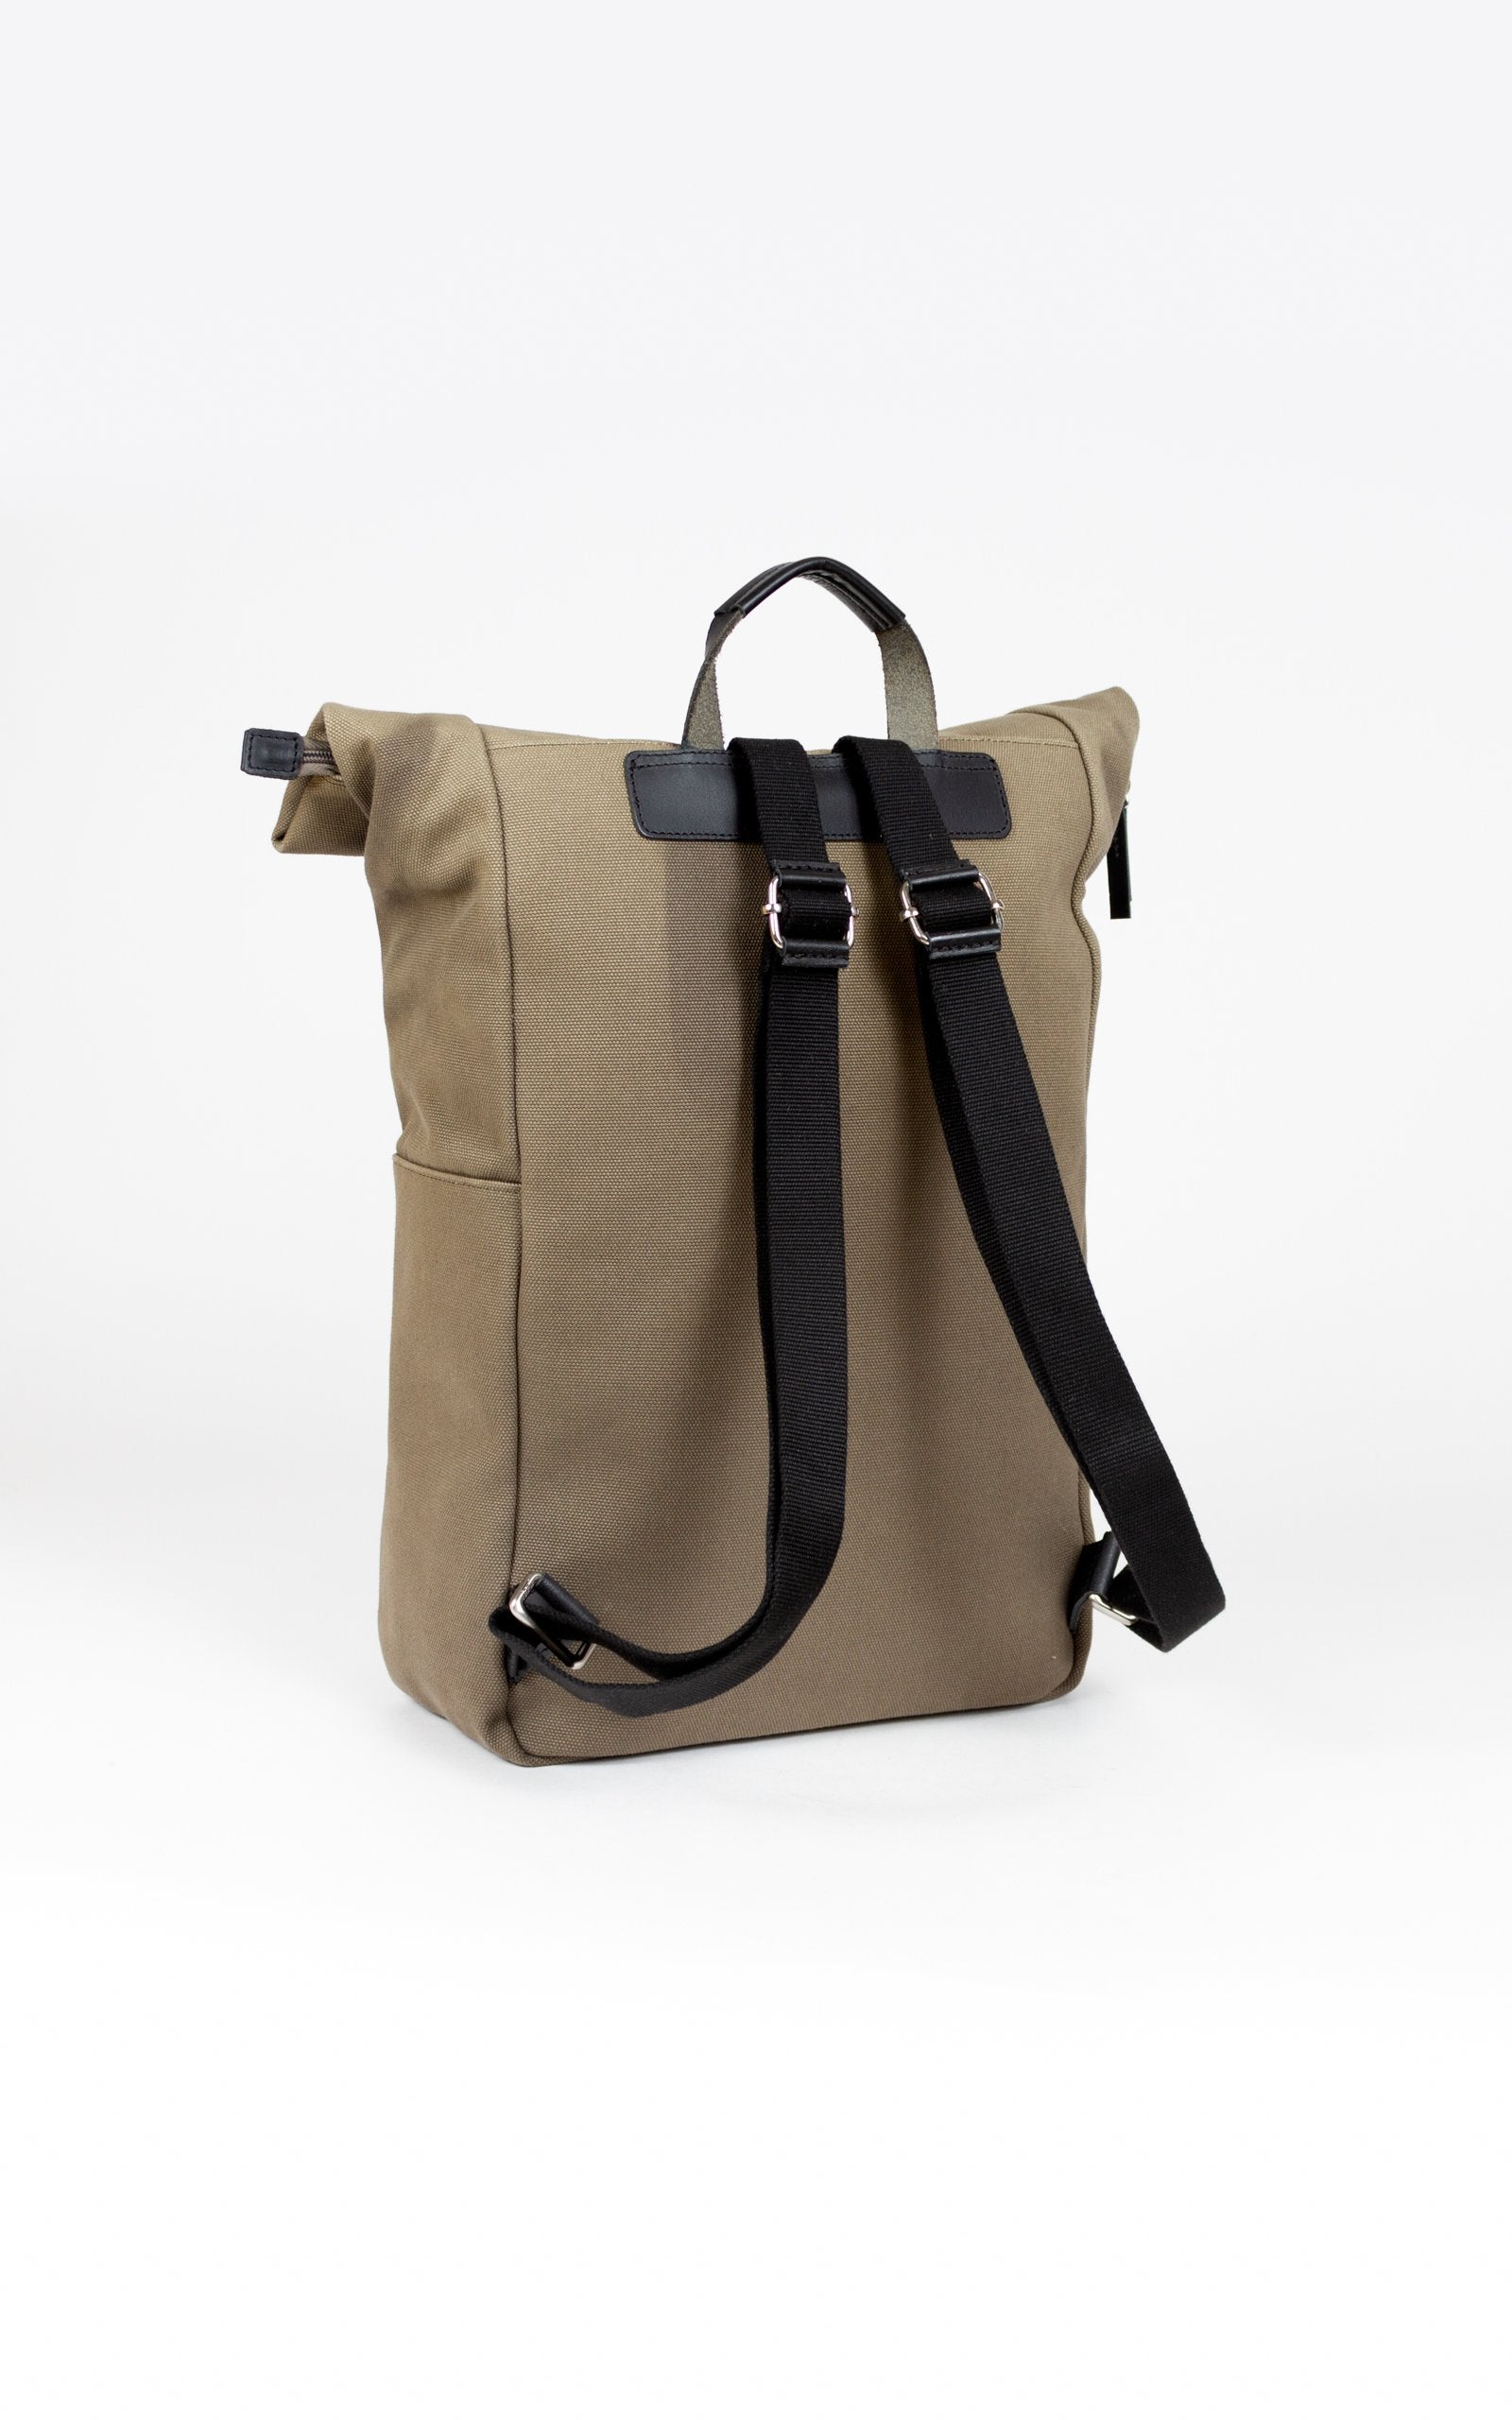 BEON.COM.AU The Jost Lund range are sturdy canvas bags with full grain leather trims, all made in Europe from premium European leathers and fabrics. Bags Jost at BEON.COM.AU